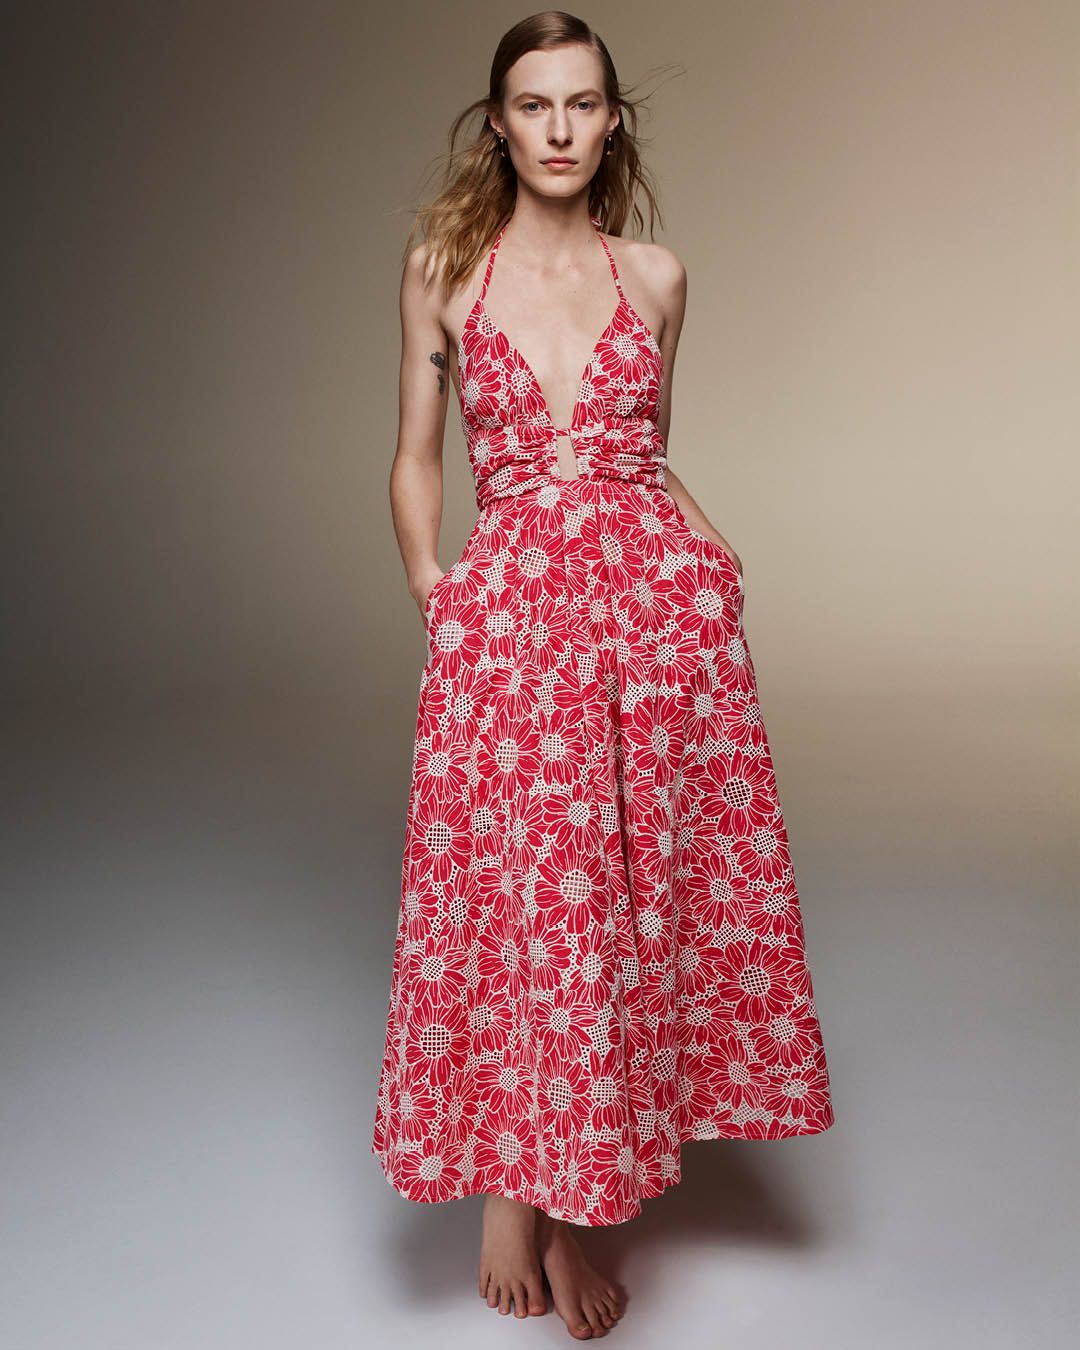 Julia Nobis standing with hands in pockets wearing a pink floral embroidered long dress